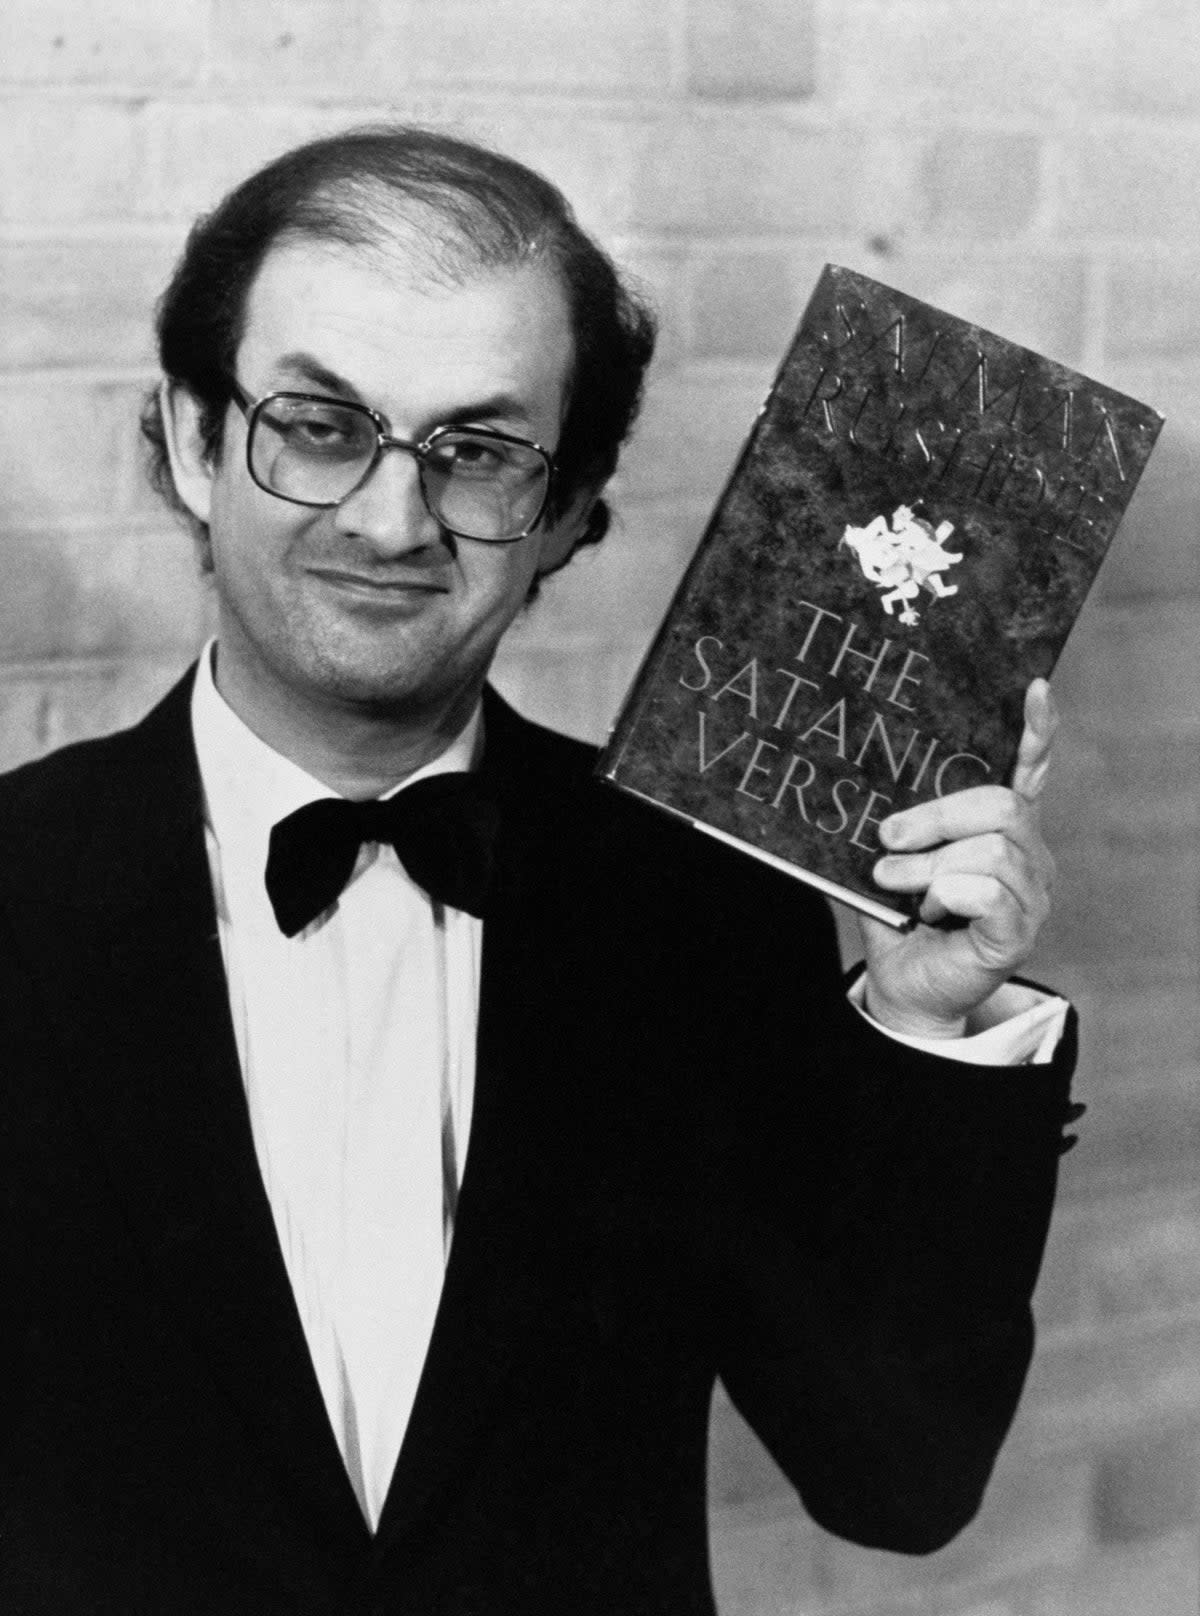 Controversy: Salman Rushdie published ‘The Satanic Verses’ in 1988 (PA)